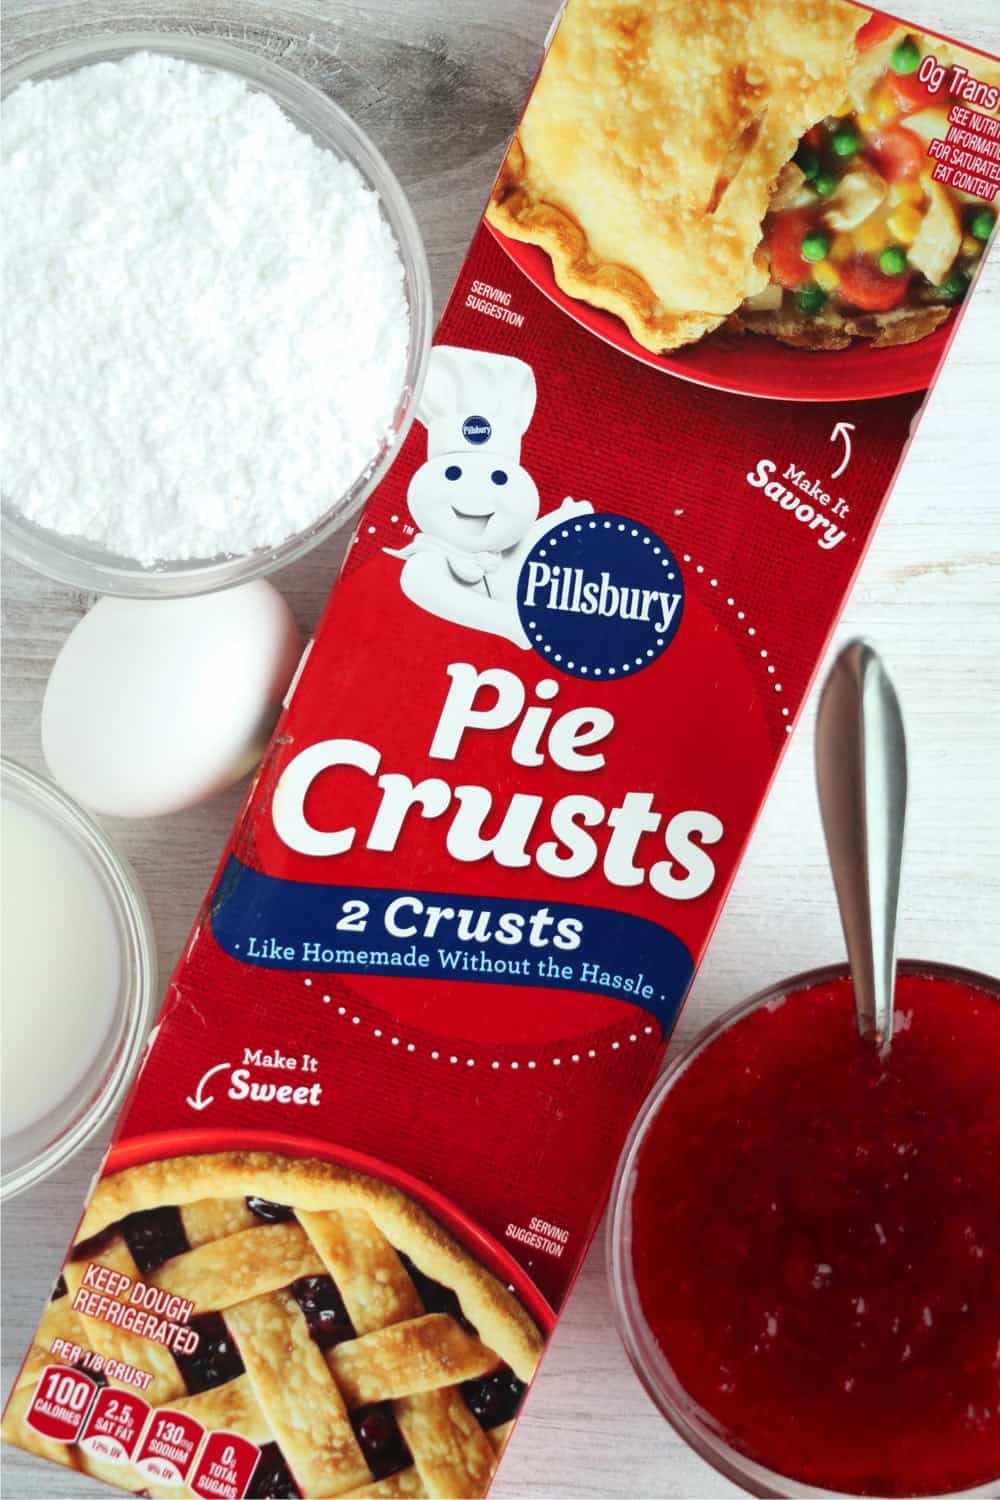 Ingredients including powdered sugar and pie crusts